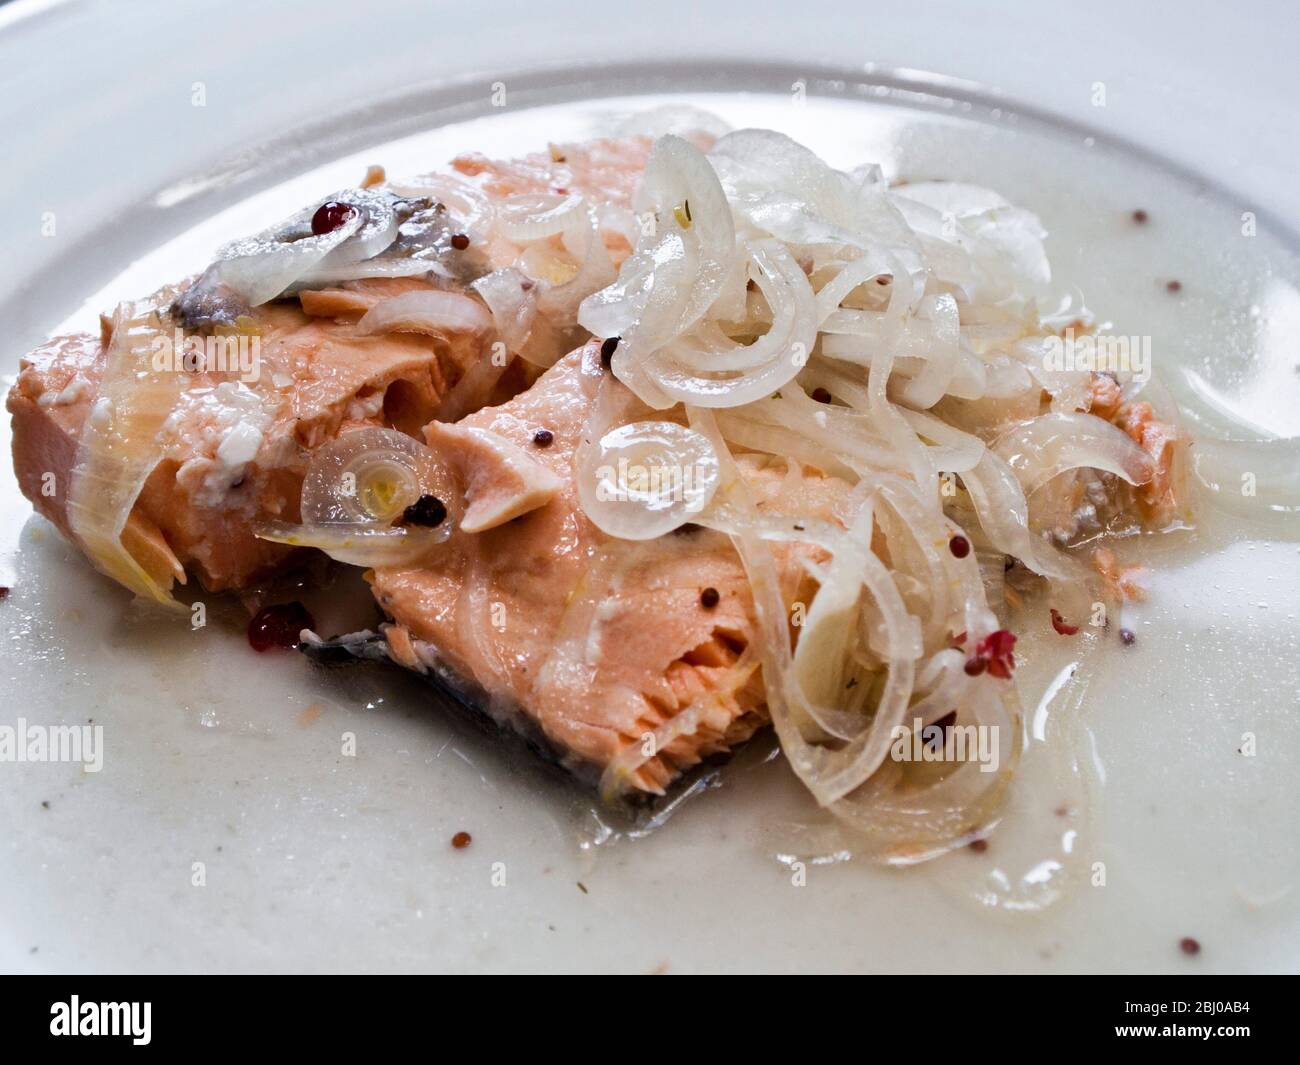 Swedish pickled salmon with spirit vinegar, salt and sugar, mustarde seeds, peppercorns, served as a starter or part of a smorgasbord Stock Photo